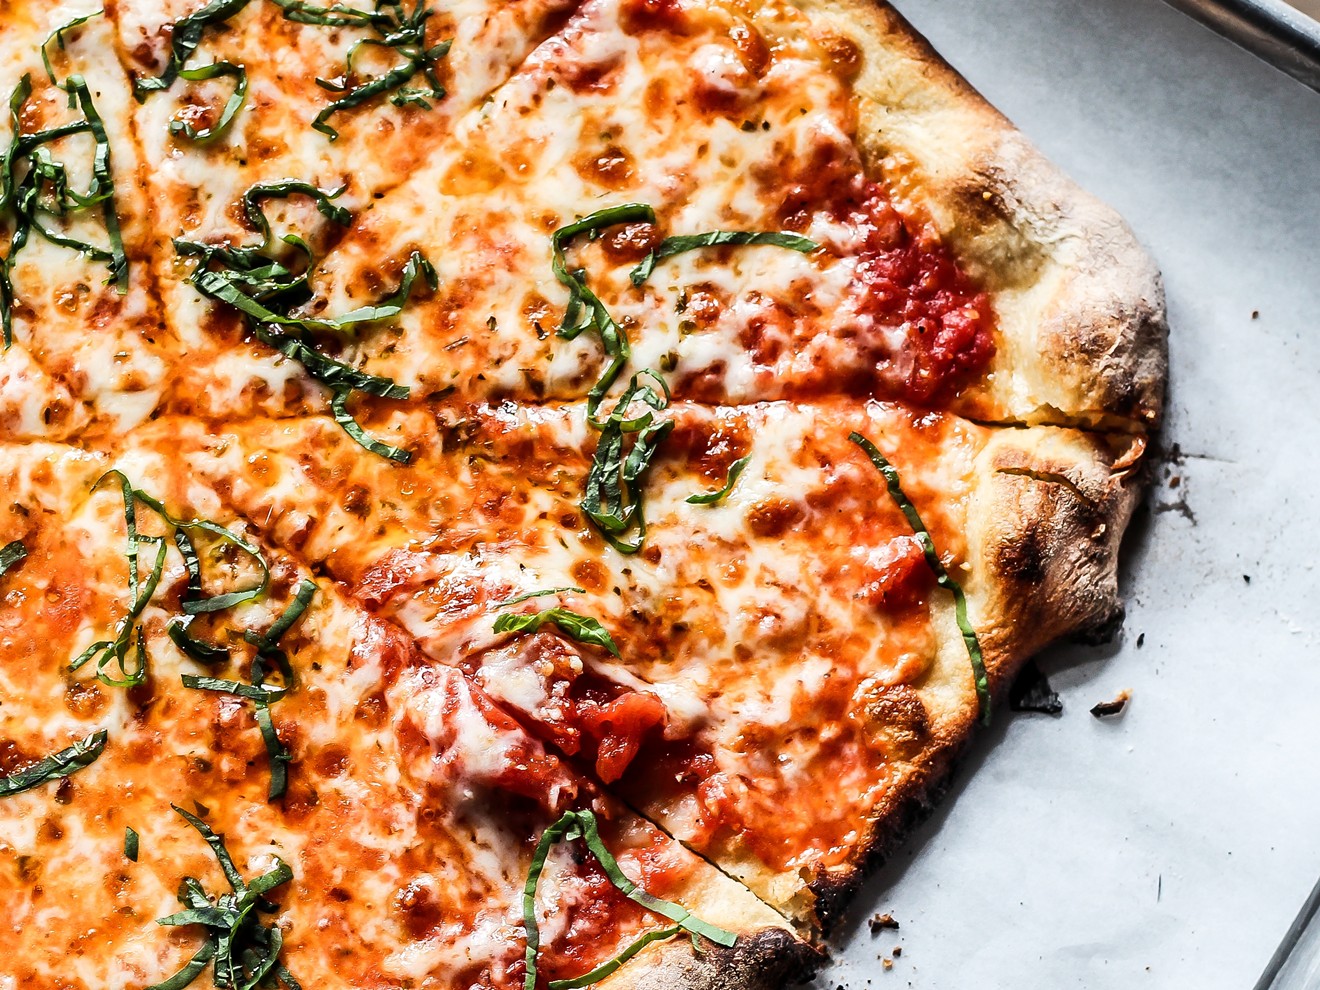 Get a New Haven-style pizza for lunch for just $10 through the end of June.